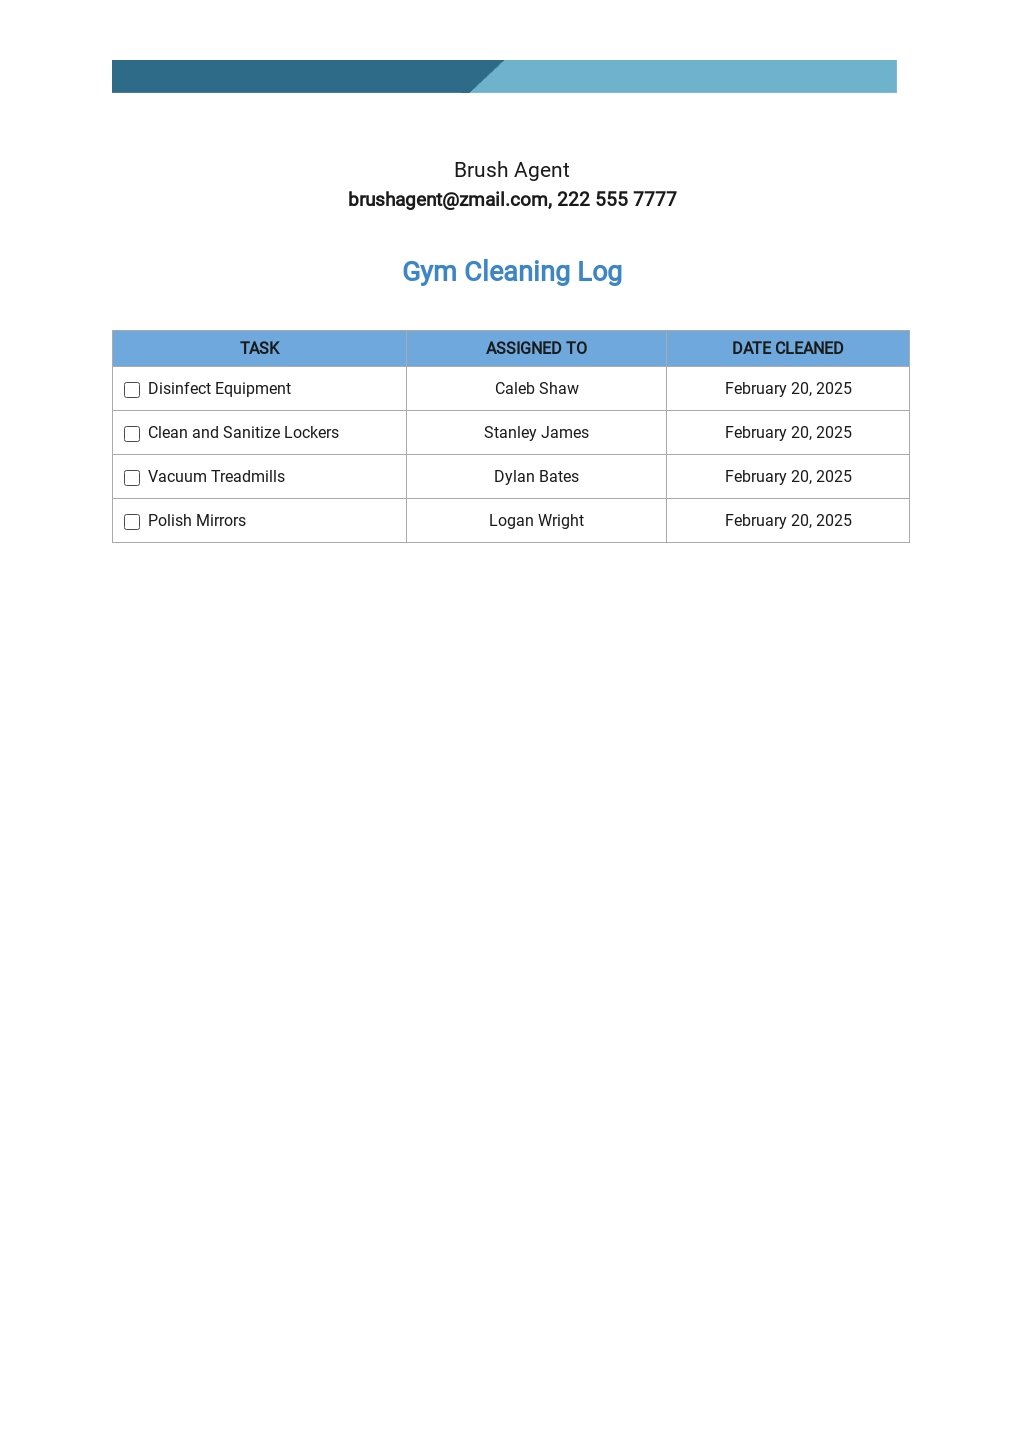 Gym Cleaning Log Template.jpe